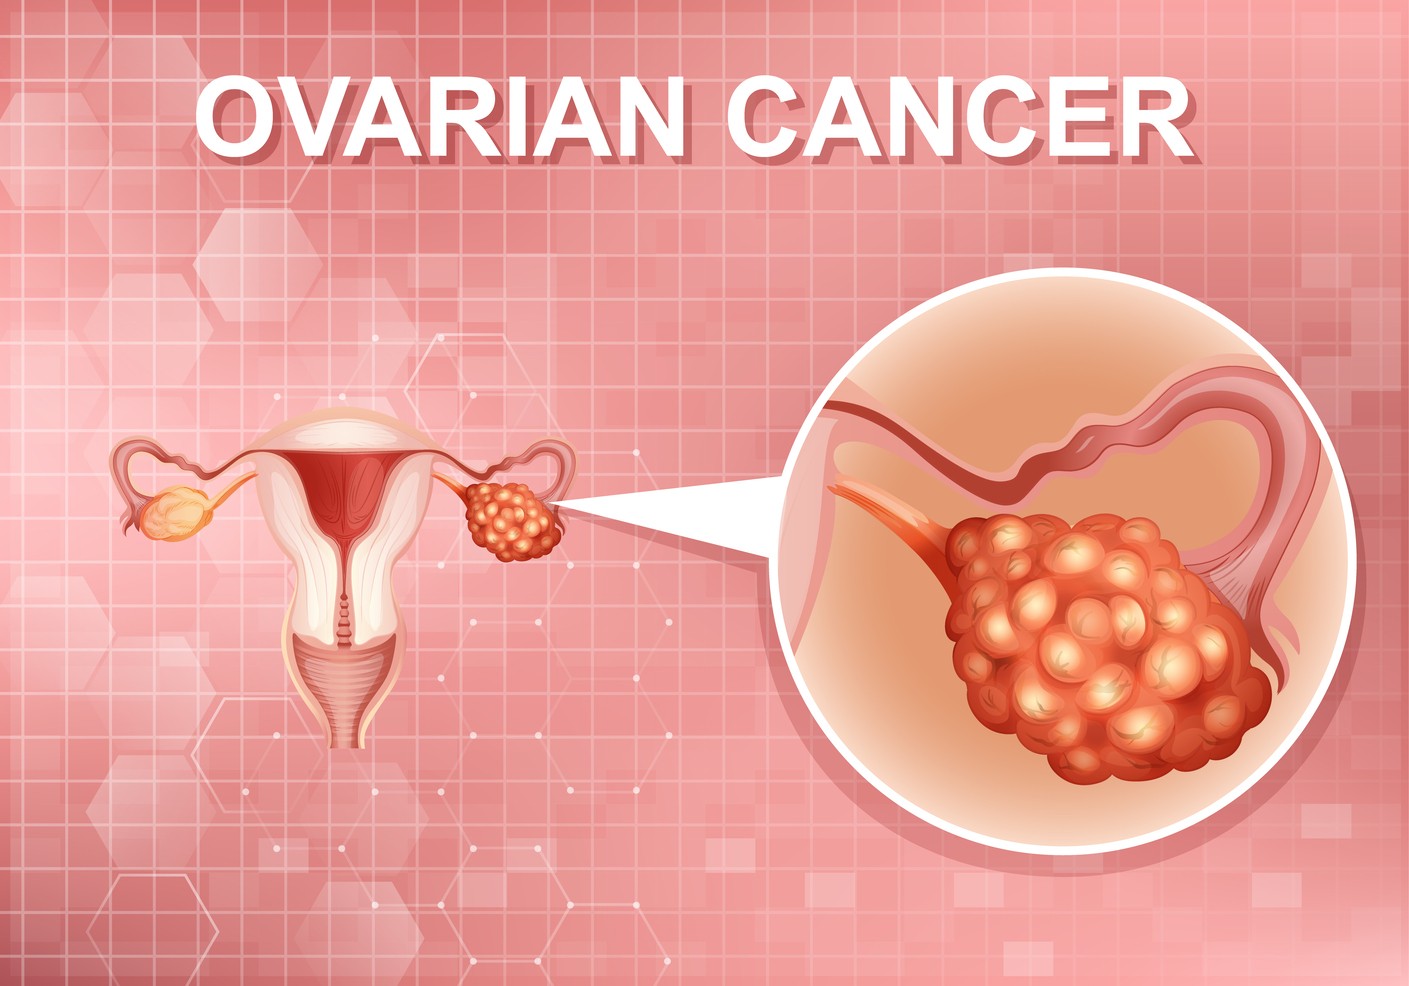 Recognising early symptoms of ovarian cancer